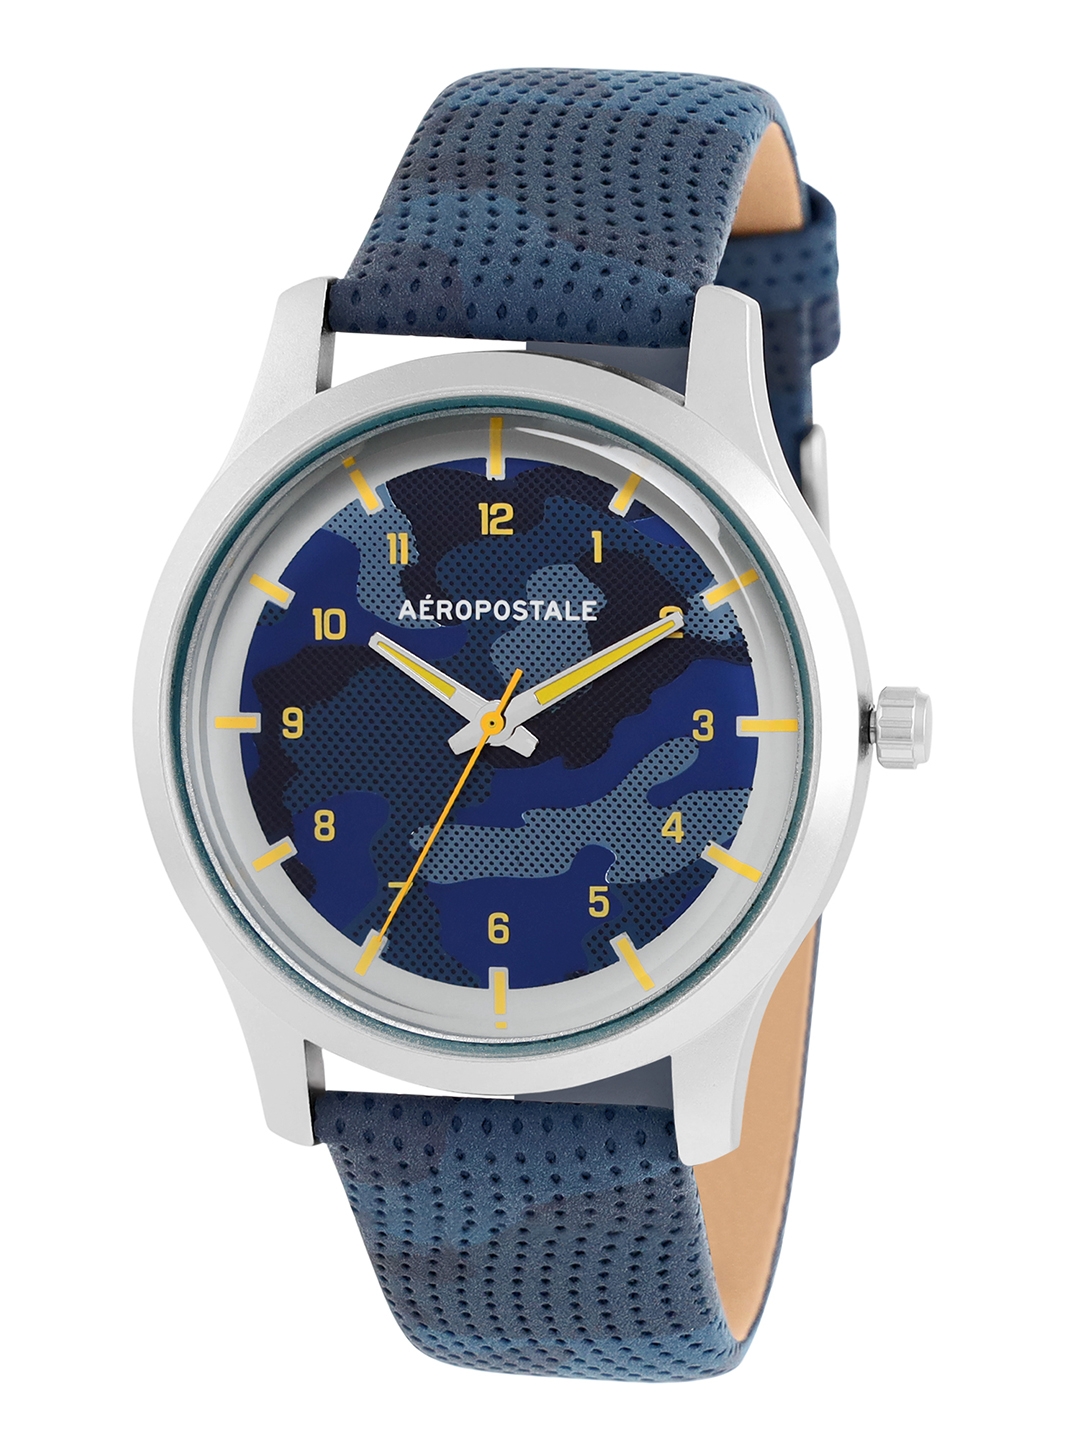 Aeropostale | Aeropostale "AERO_AW_A7-4_BLU" Classic Men’s Analog Quartz Wrist Watch, Silver Metal Alloy case, Classic Blue camouflage print Dial with white hand, Leather wrist Band Water resistant 3.0 ATM. 1